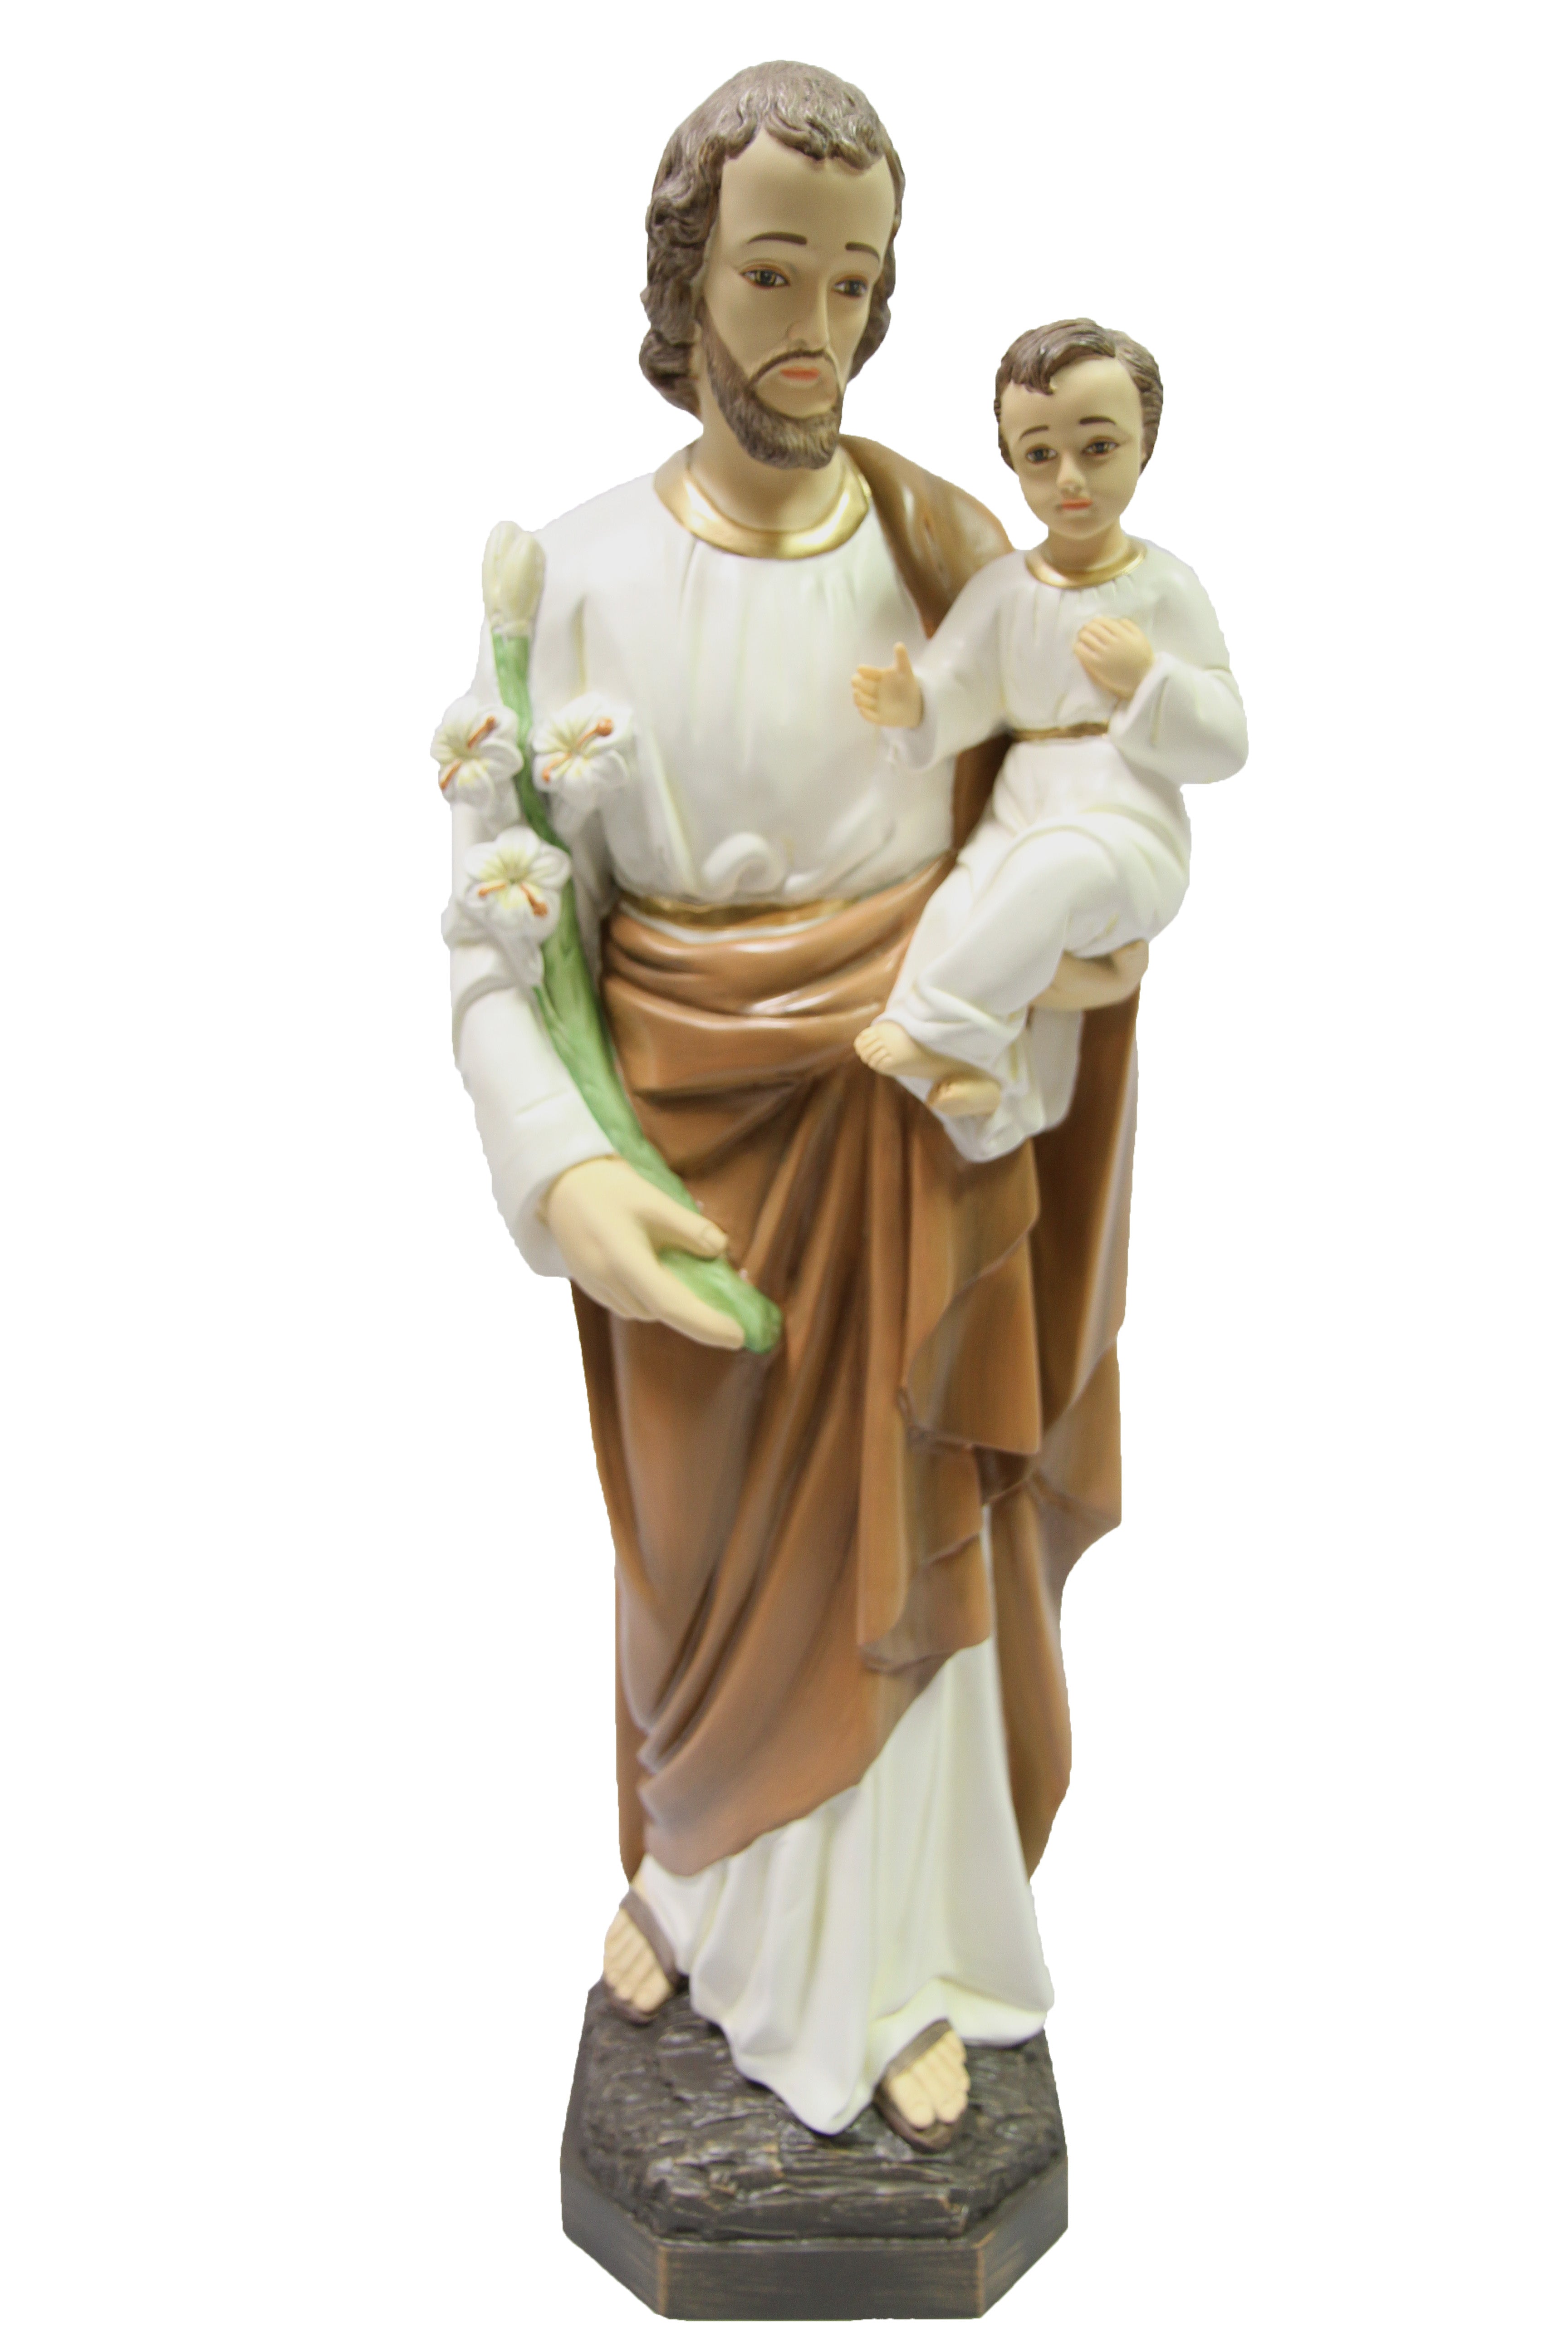 25.5 Inch Saint Joseph with Baby Jesus Catholic Religious Statue Vittoria Collection Made in Italy